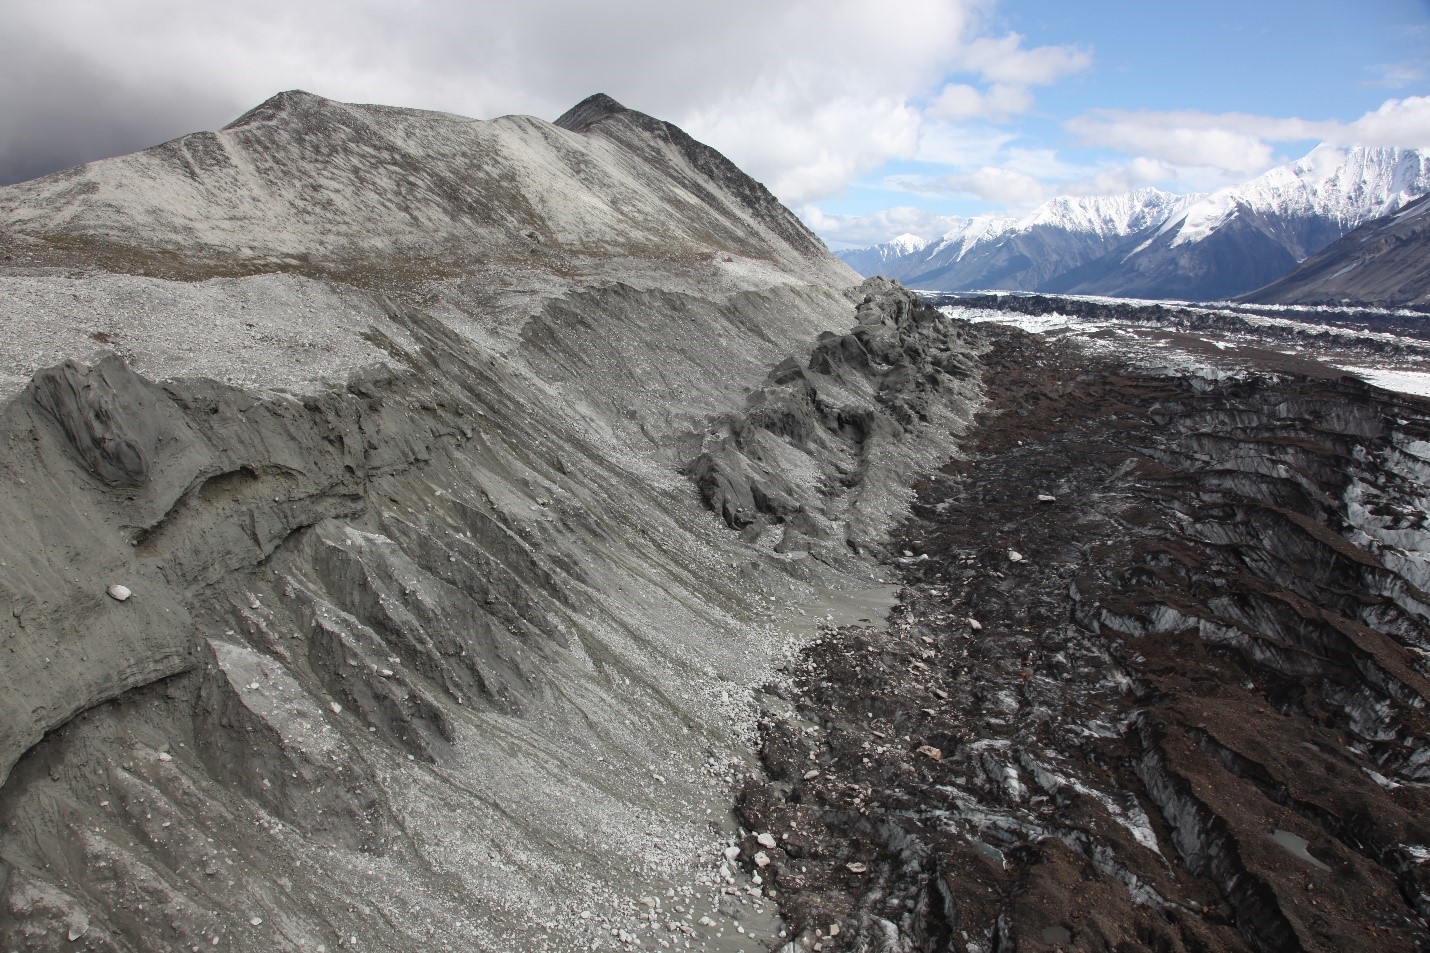 Image of glacial moraine.  Pale-colored fine gravel covers a steep slope down to a jumbled glacier covered in darker rocks